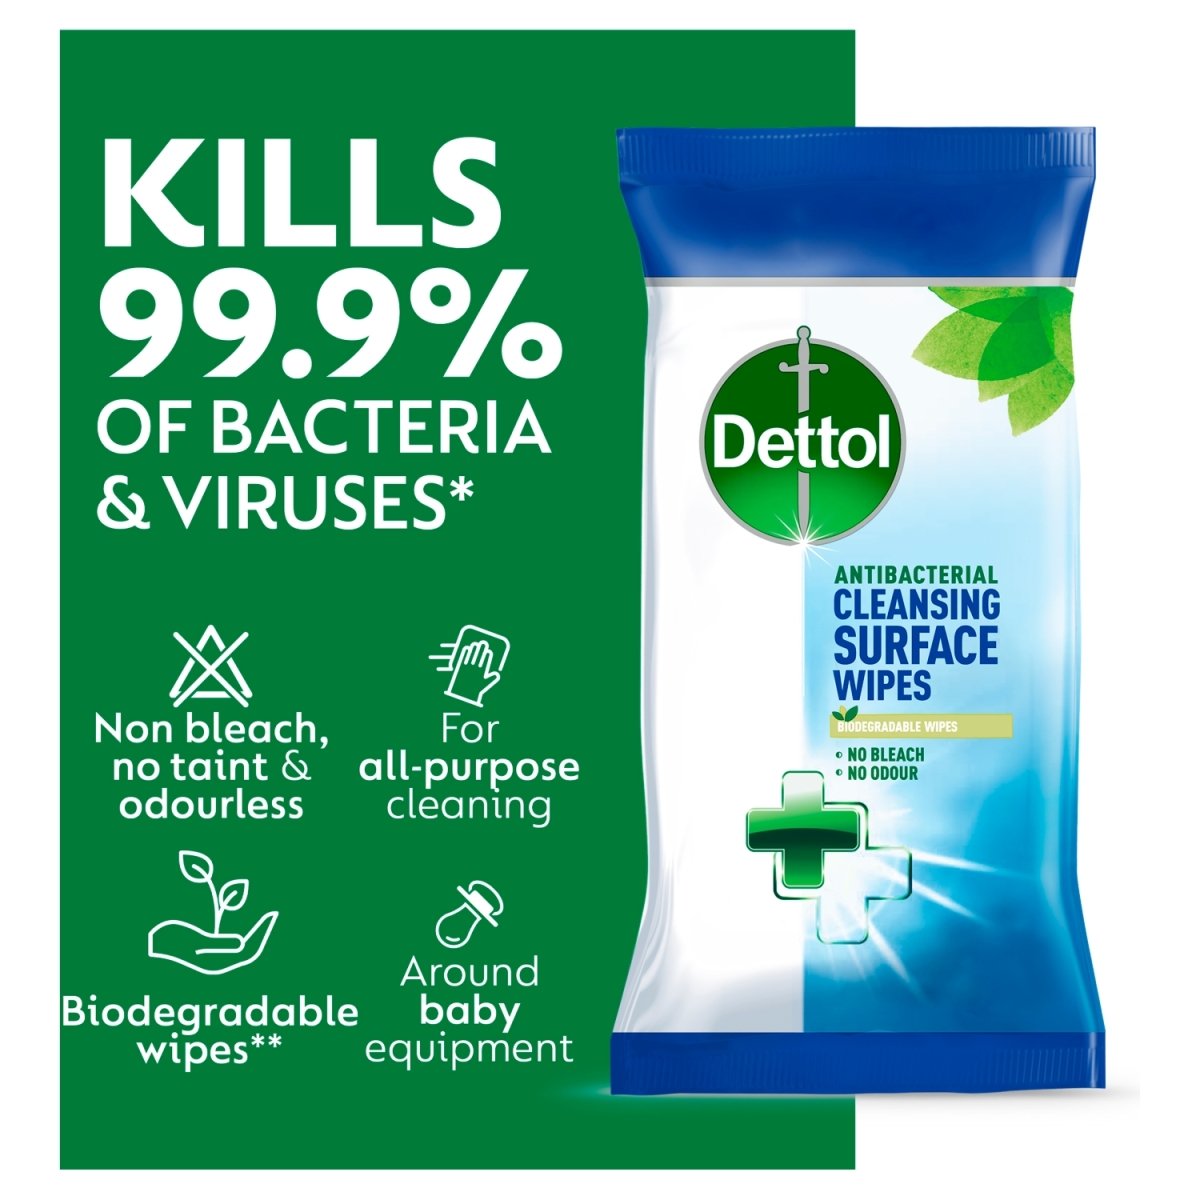 Dettol Antibacterial Cleansing Surface Wipes 110s - Intamarque 5011417569689